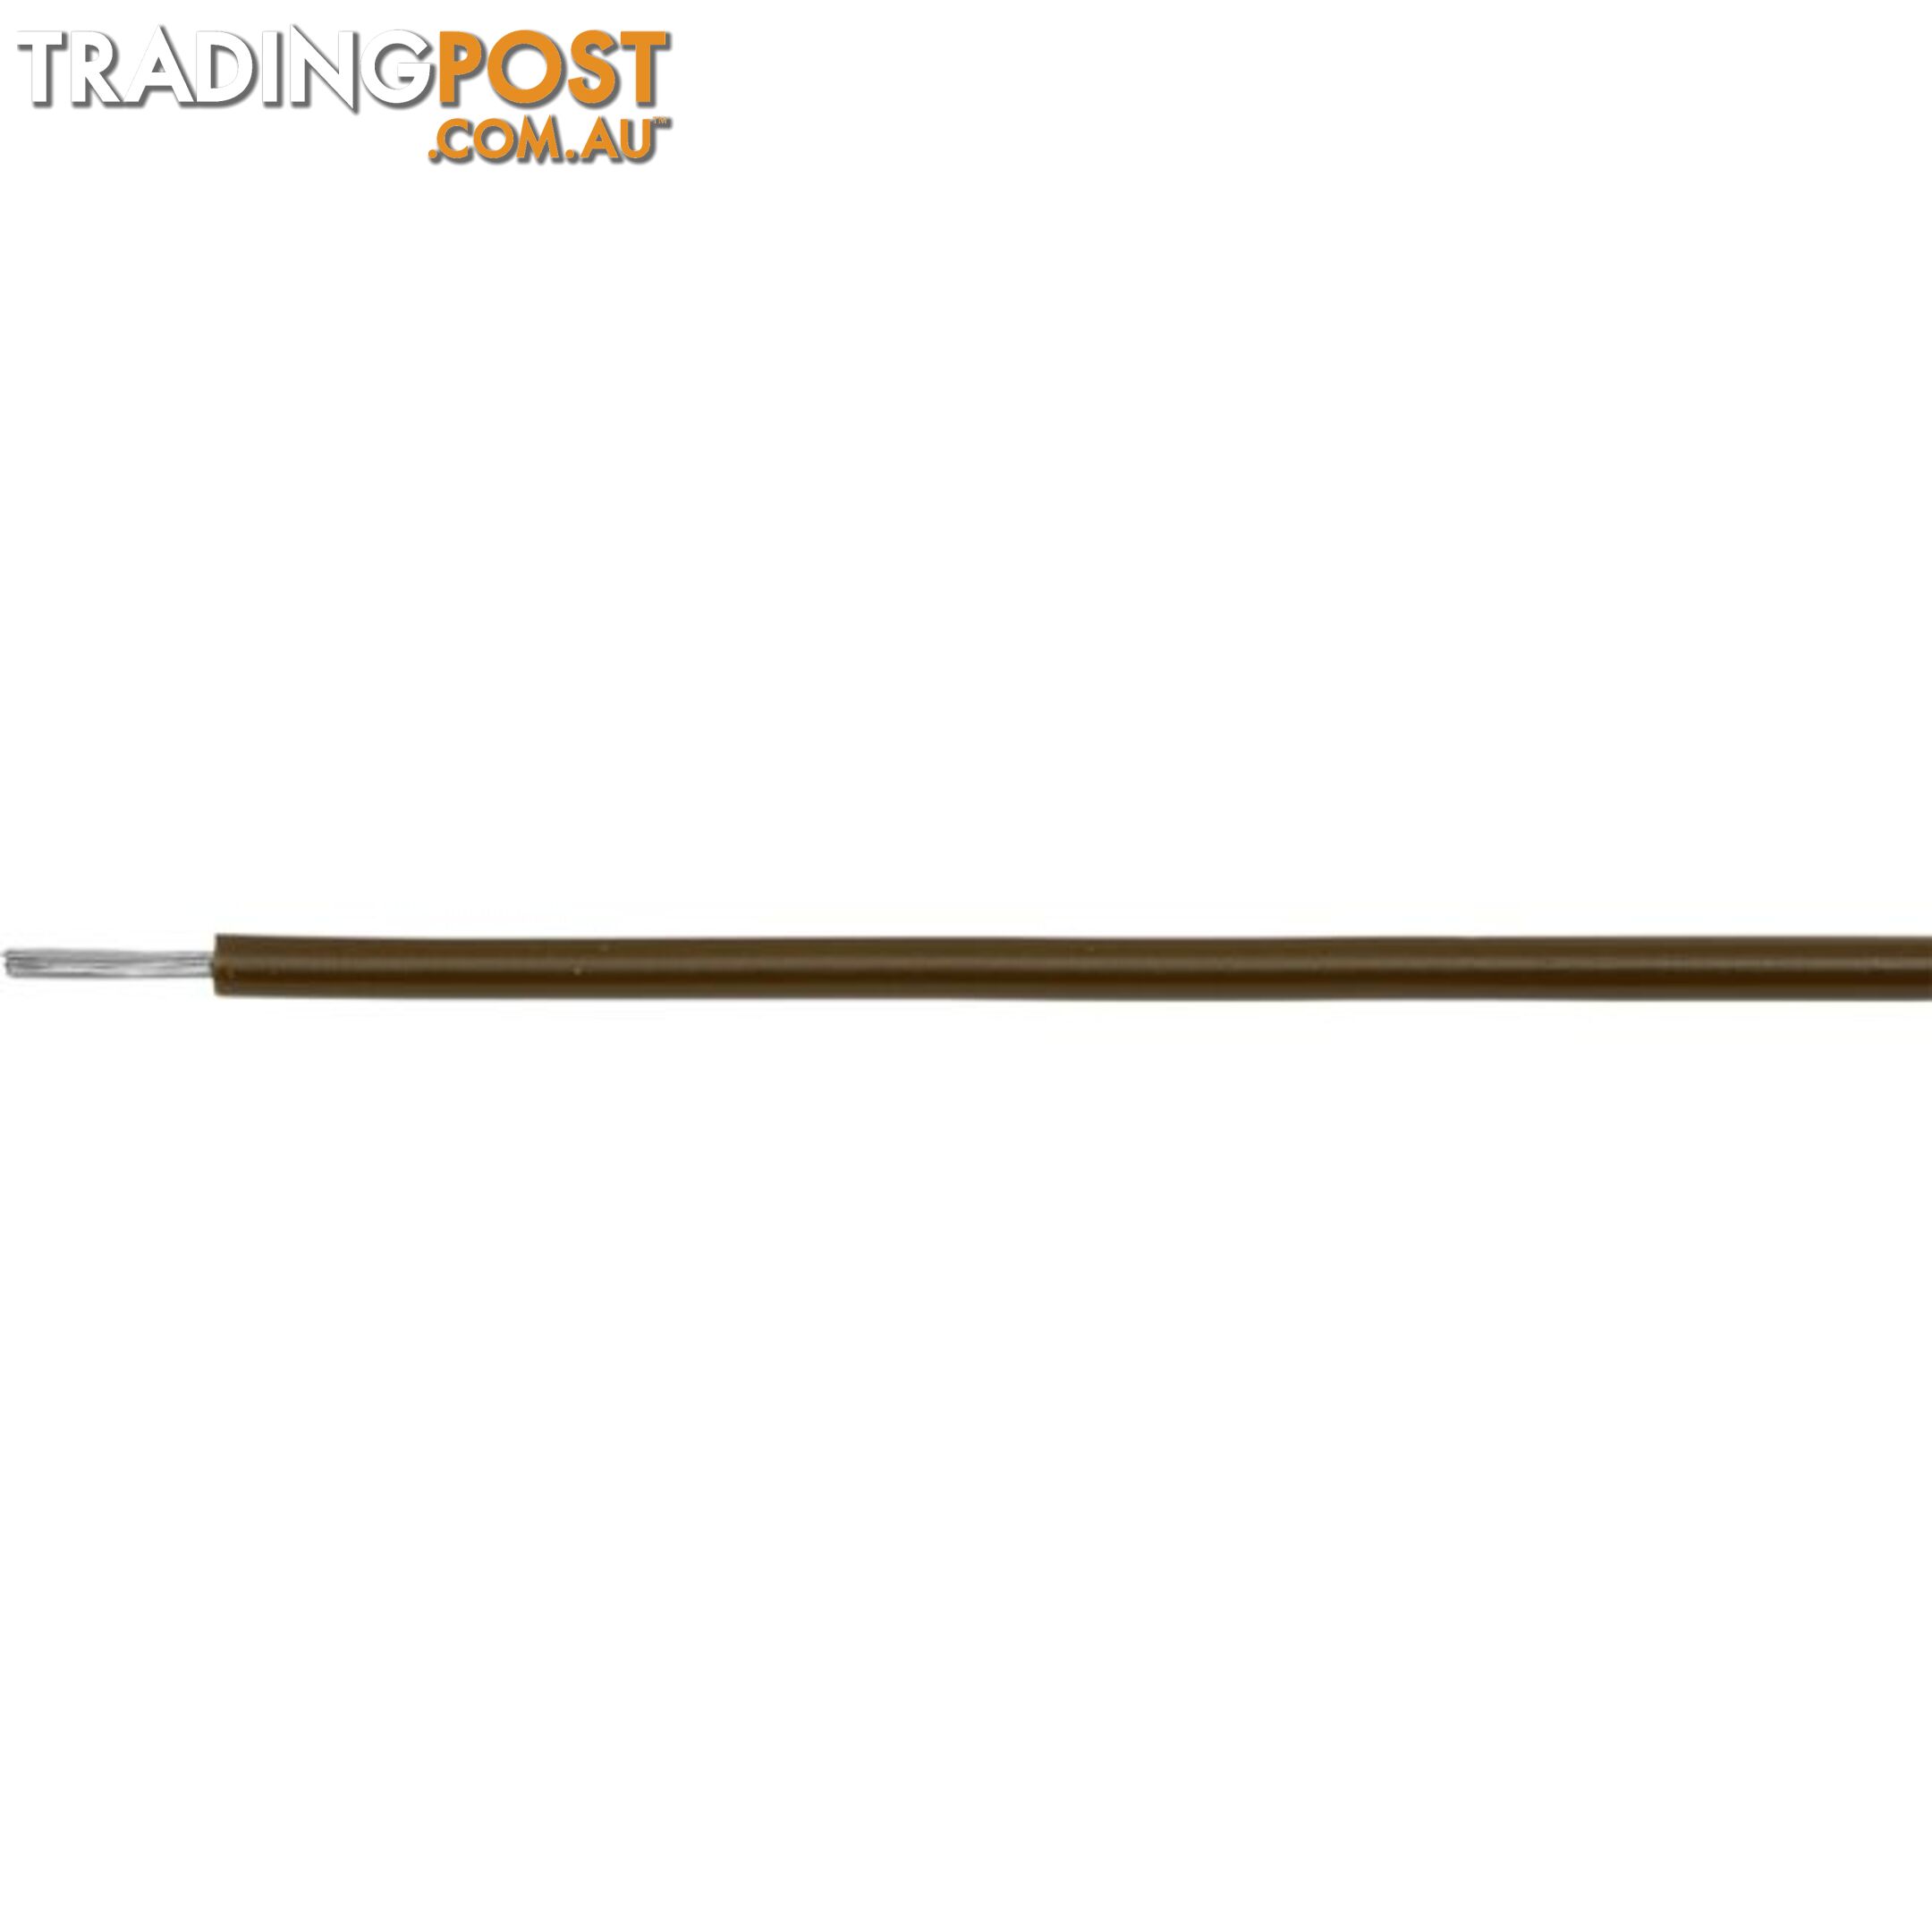 24-.2BR-1M BROWN HOOKUP WIRE/ CABLE-1M 7A - PER METRE